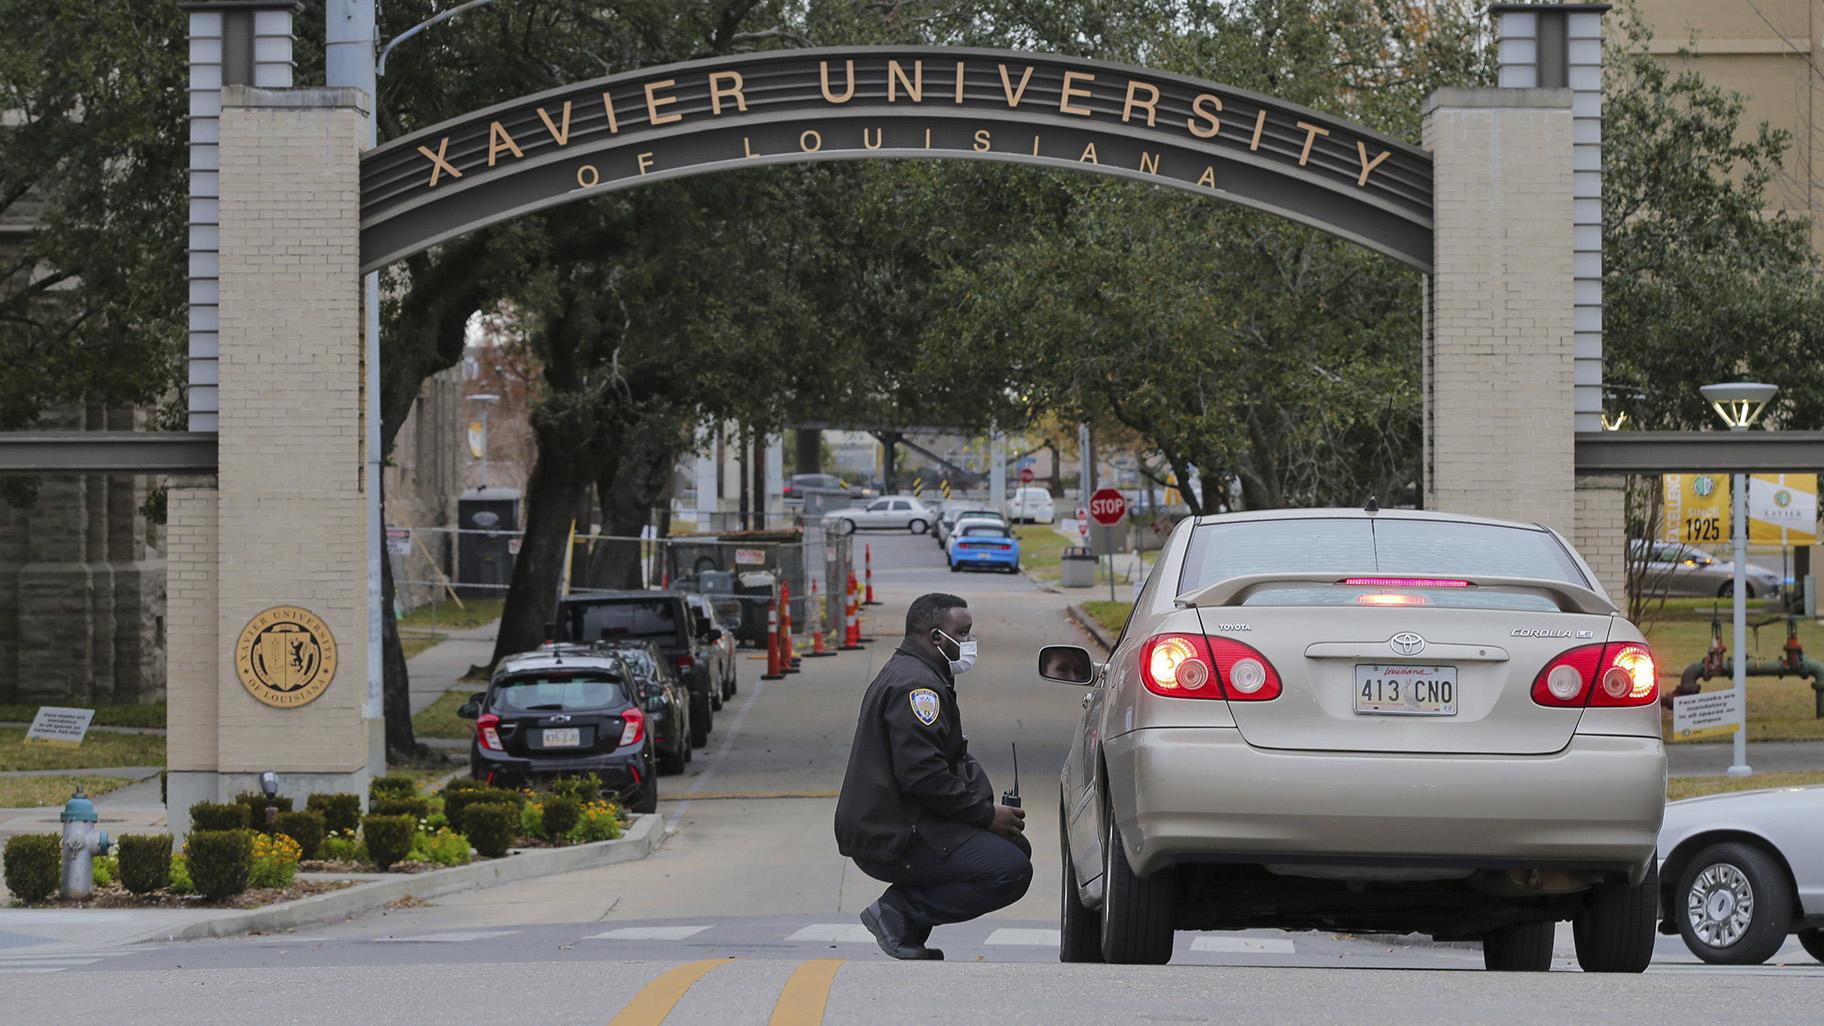 A Xavier University police officer redirects a motorist around campus after a bomb threat put the campus on lockdown in New Orleans, La., Feb. 1, 2022. (David Grunfeld / The Advocate via AP, File)